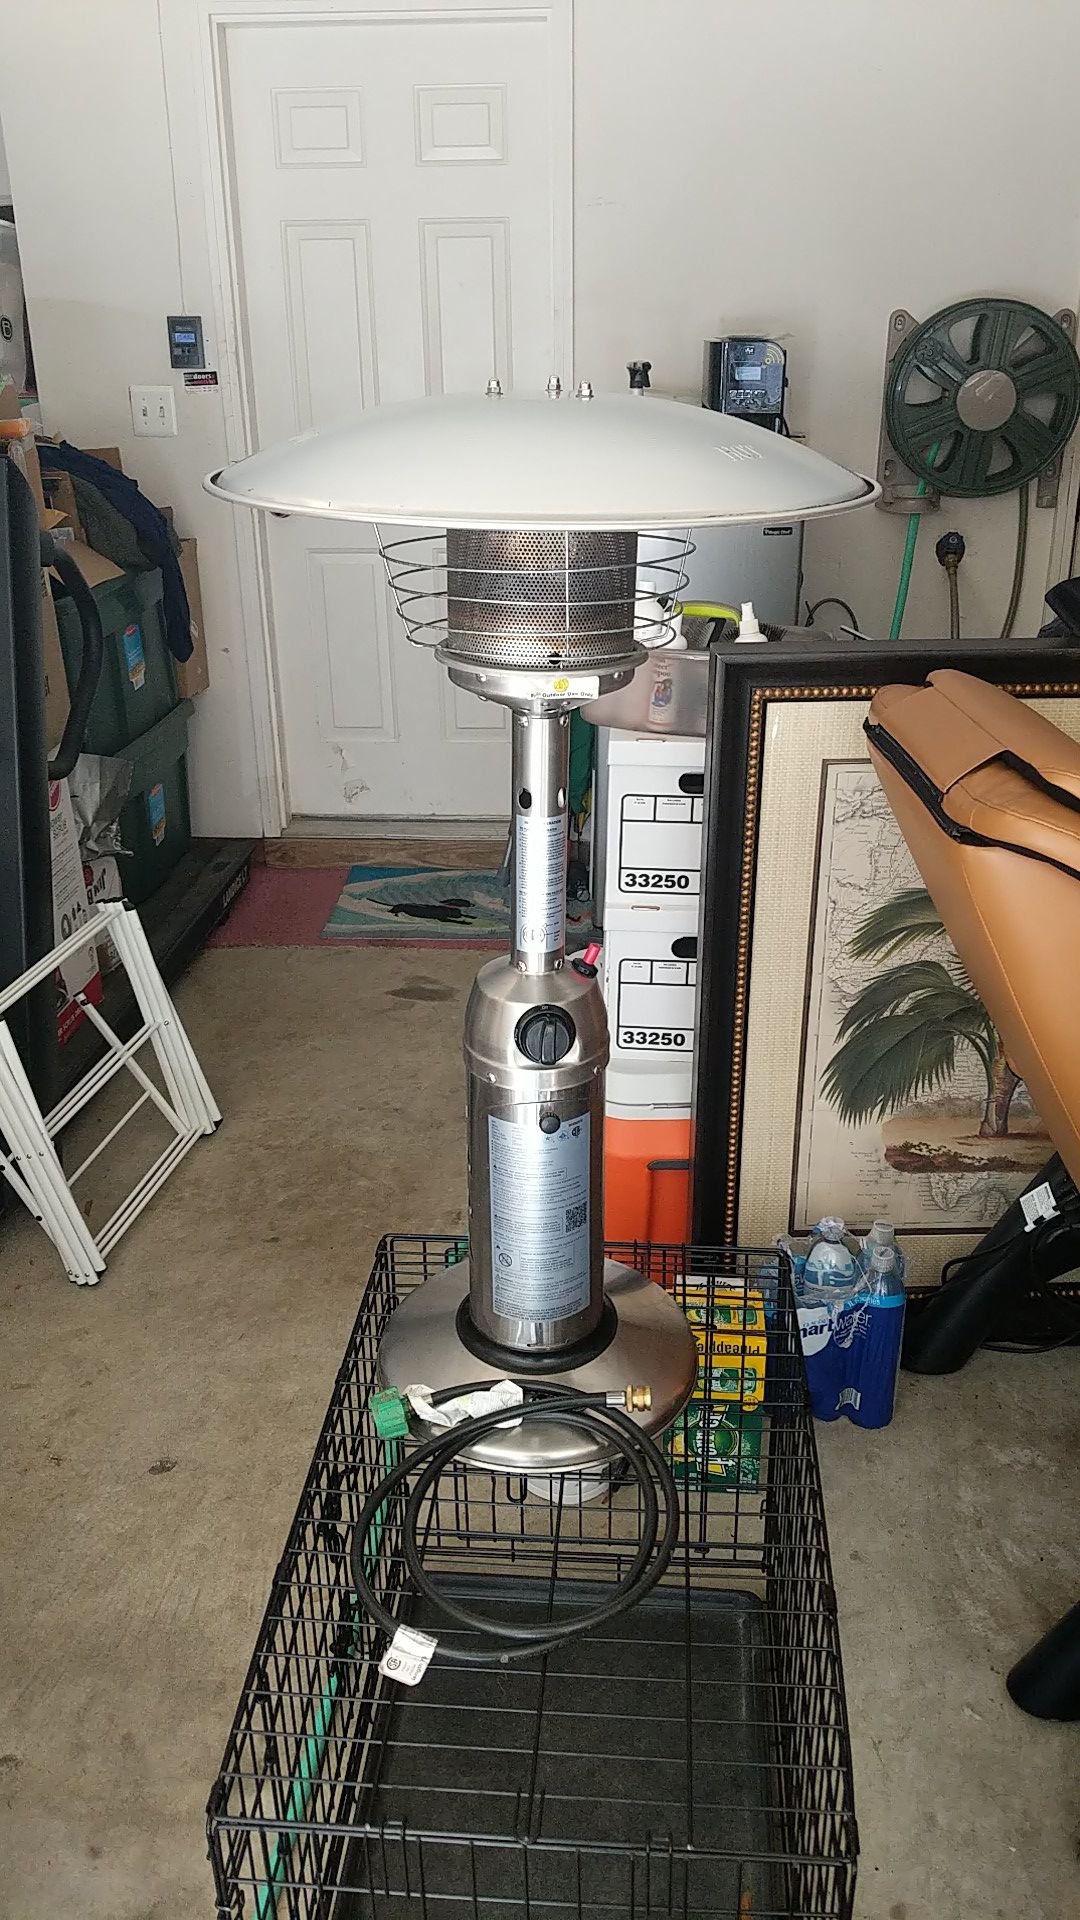 Hiland Table Top Portable Heater, Stainless Steel, With tank adapter